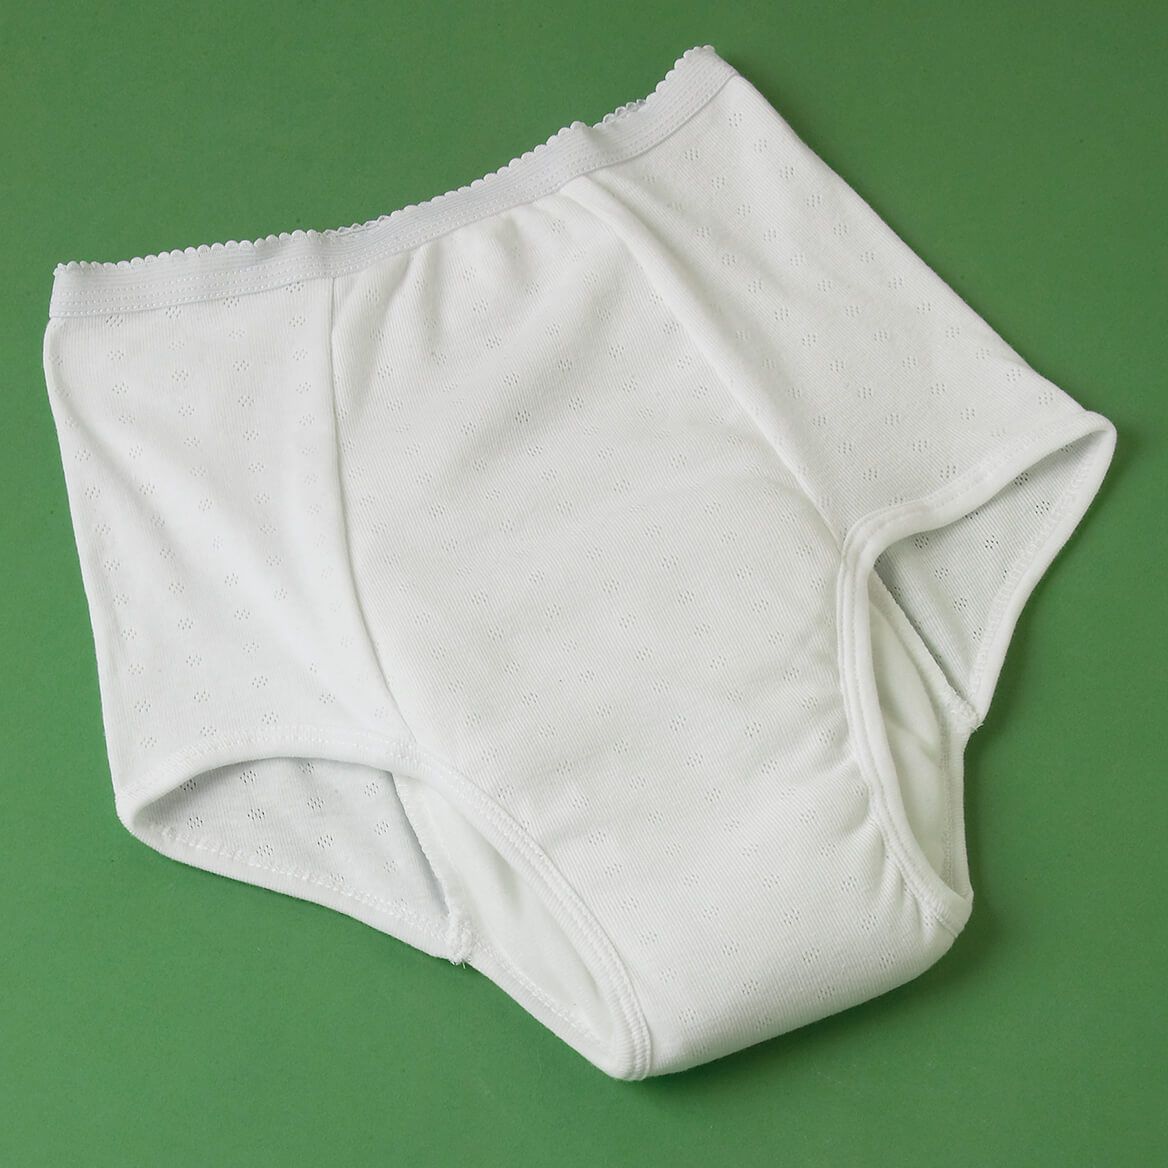 Women's 20 oz. Incontinence Brief Panty, White + '-' + 346087